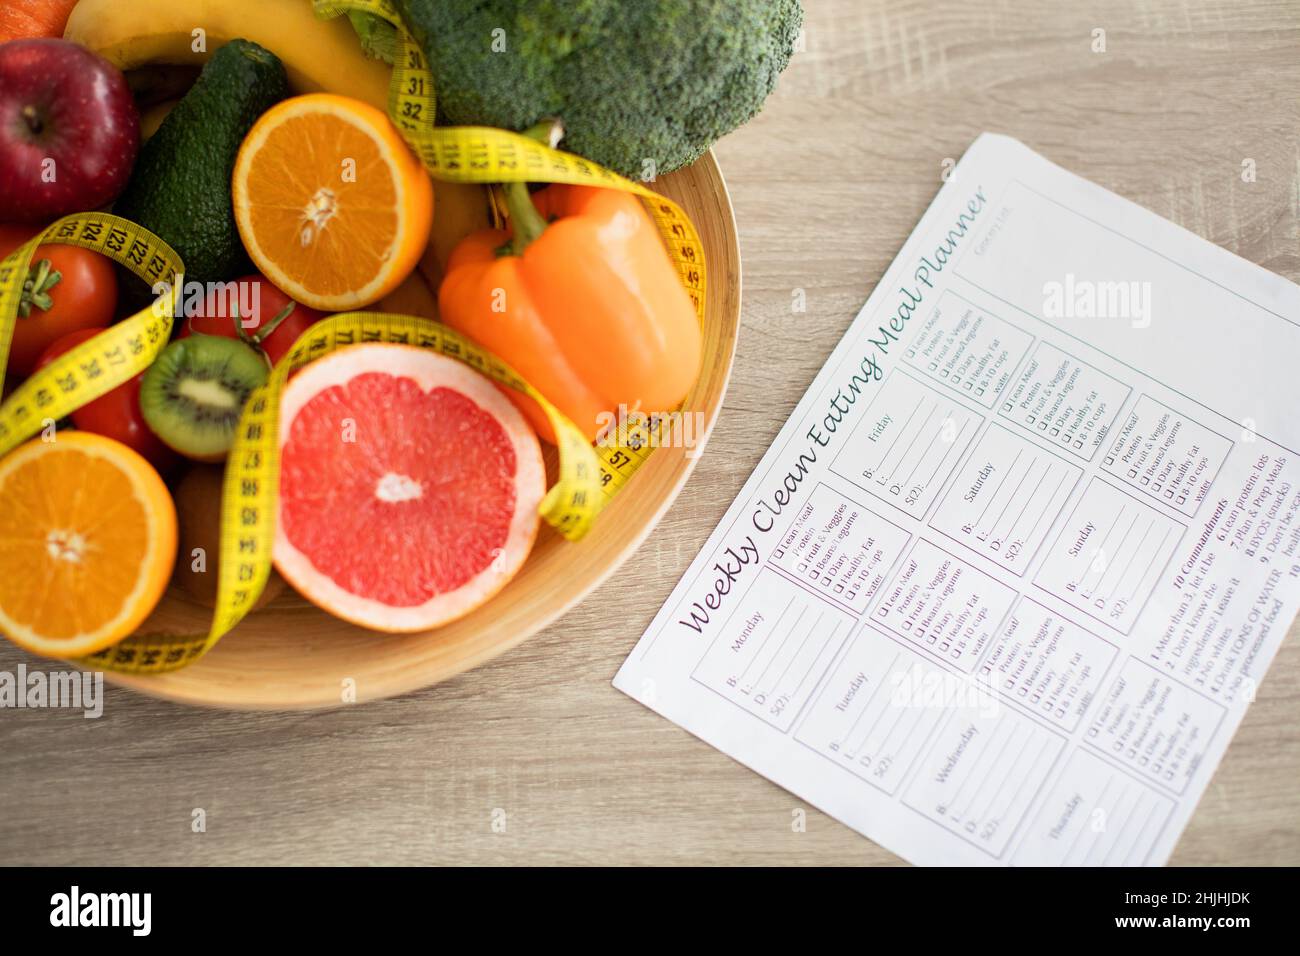 Weekly eating meal planner and plate of fresh fruits and vegetables nearby on table Stock Photo